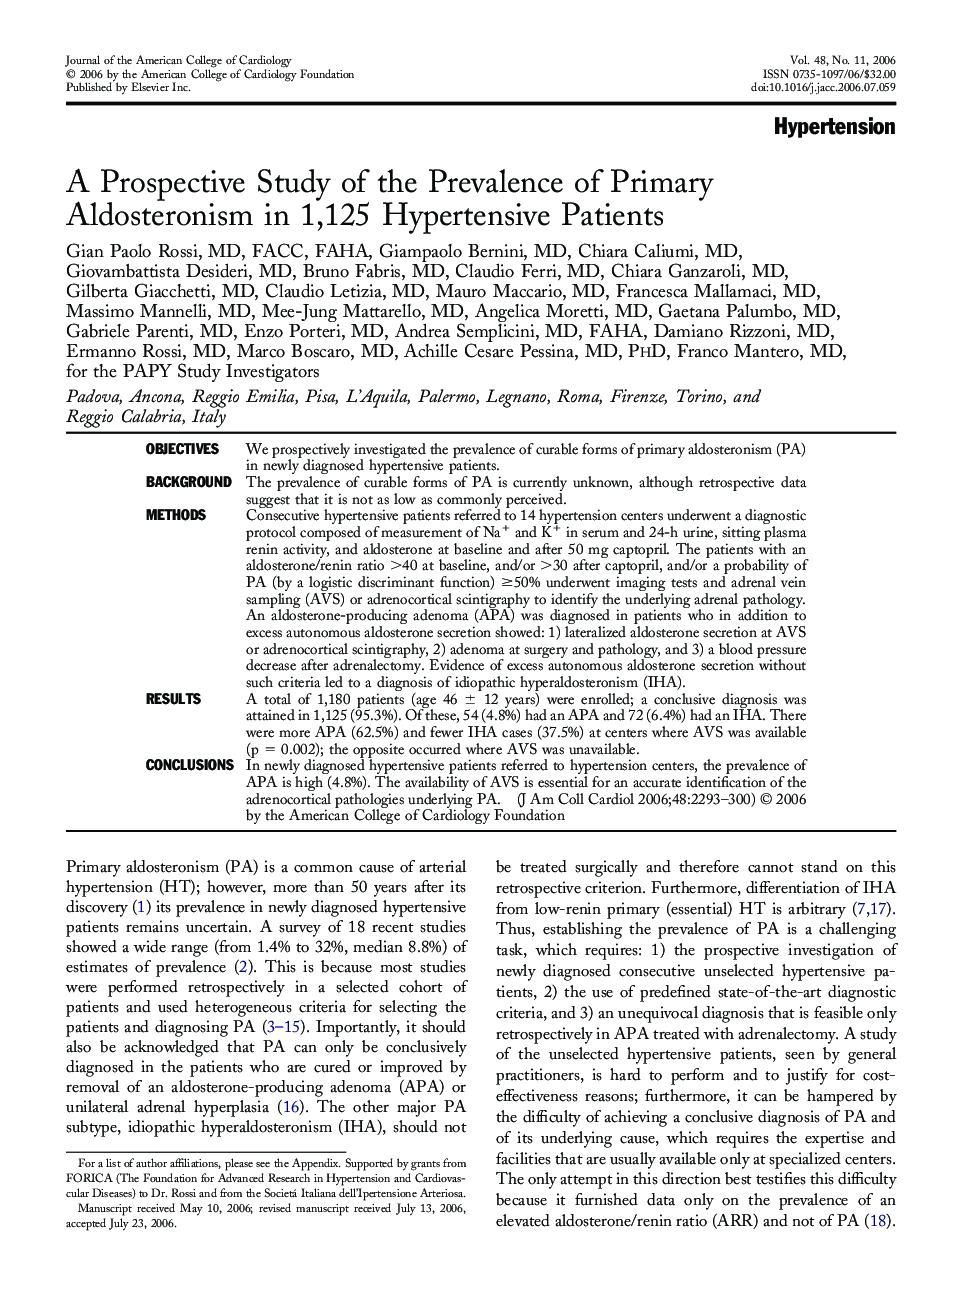 A Prospective Study of the Prevalence of Primary Aldosteronism in 1,125 Hypertensive Patients 